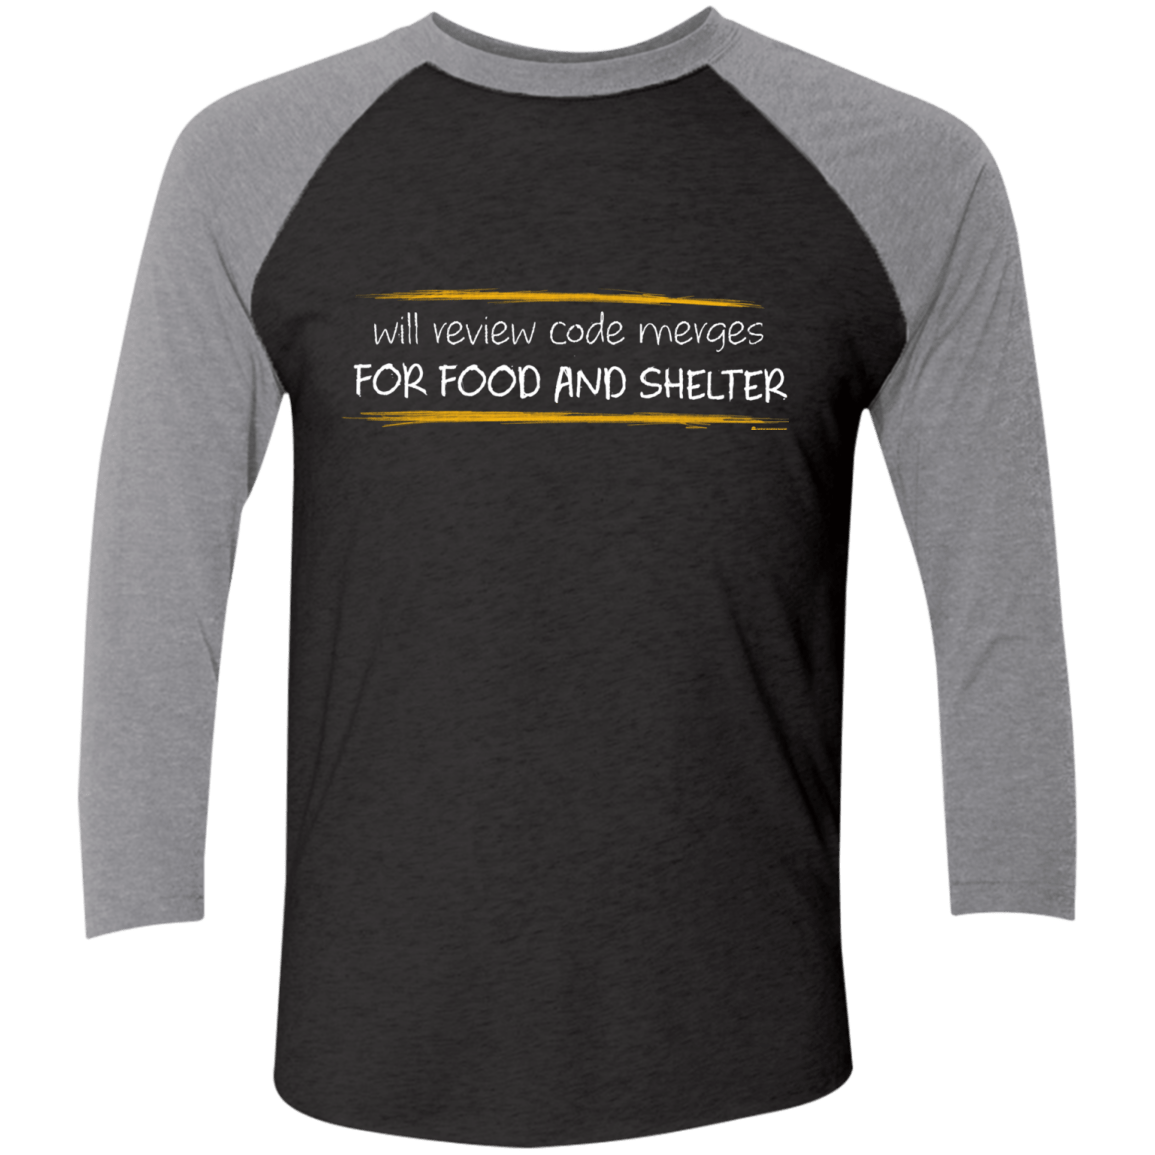 T-Shirts Vintage Black/Premium Heather / X-Small Reviewing Code For Food And Shelter Men's Triblend 3/4 Sleeve